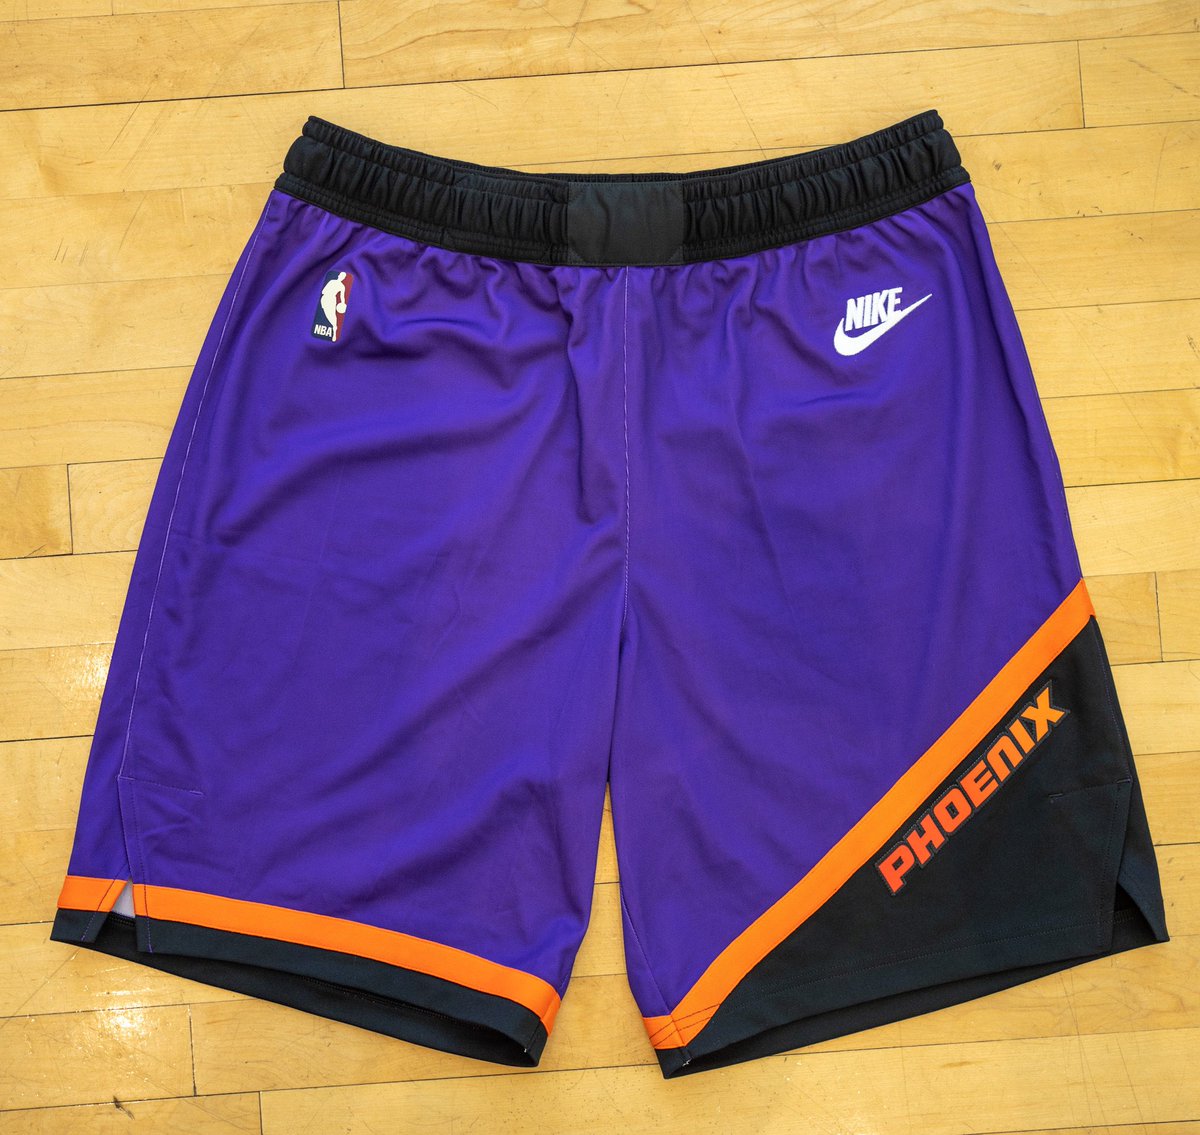 Nick DePaula on X: The Phoenix Suns are bringing back their iconic “ Sunburst” jerseys in purple this season. 🔥🔥 The new Classic Edition  uniform celebrates the 30th anniversary of the team's 1992-93